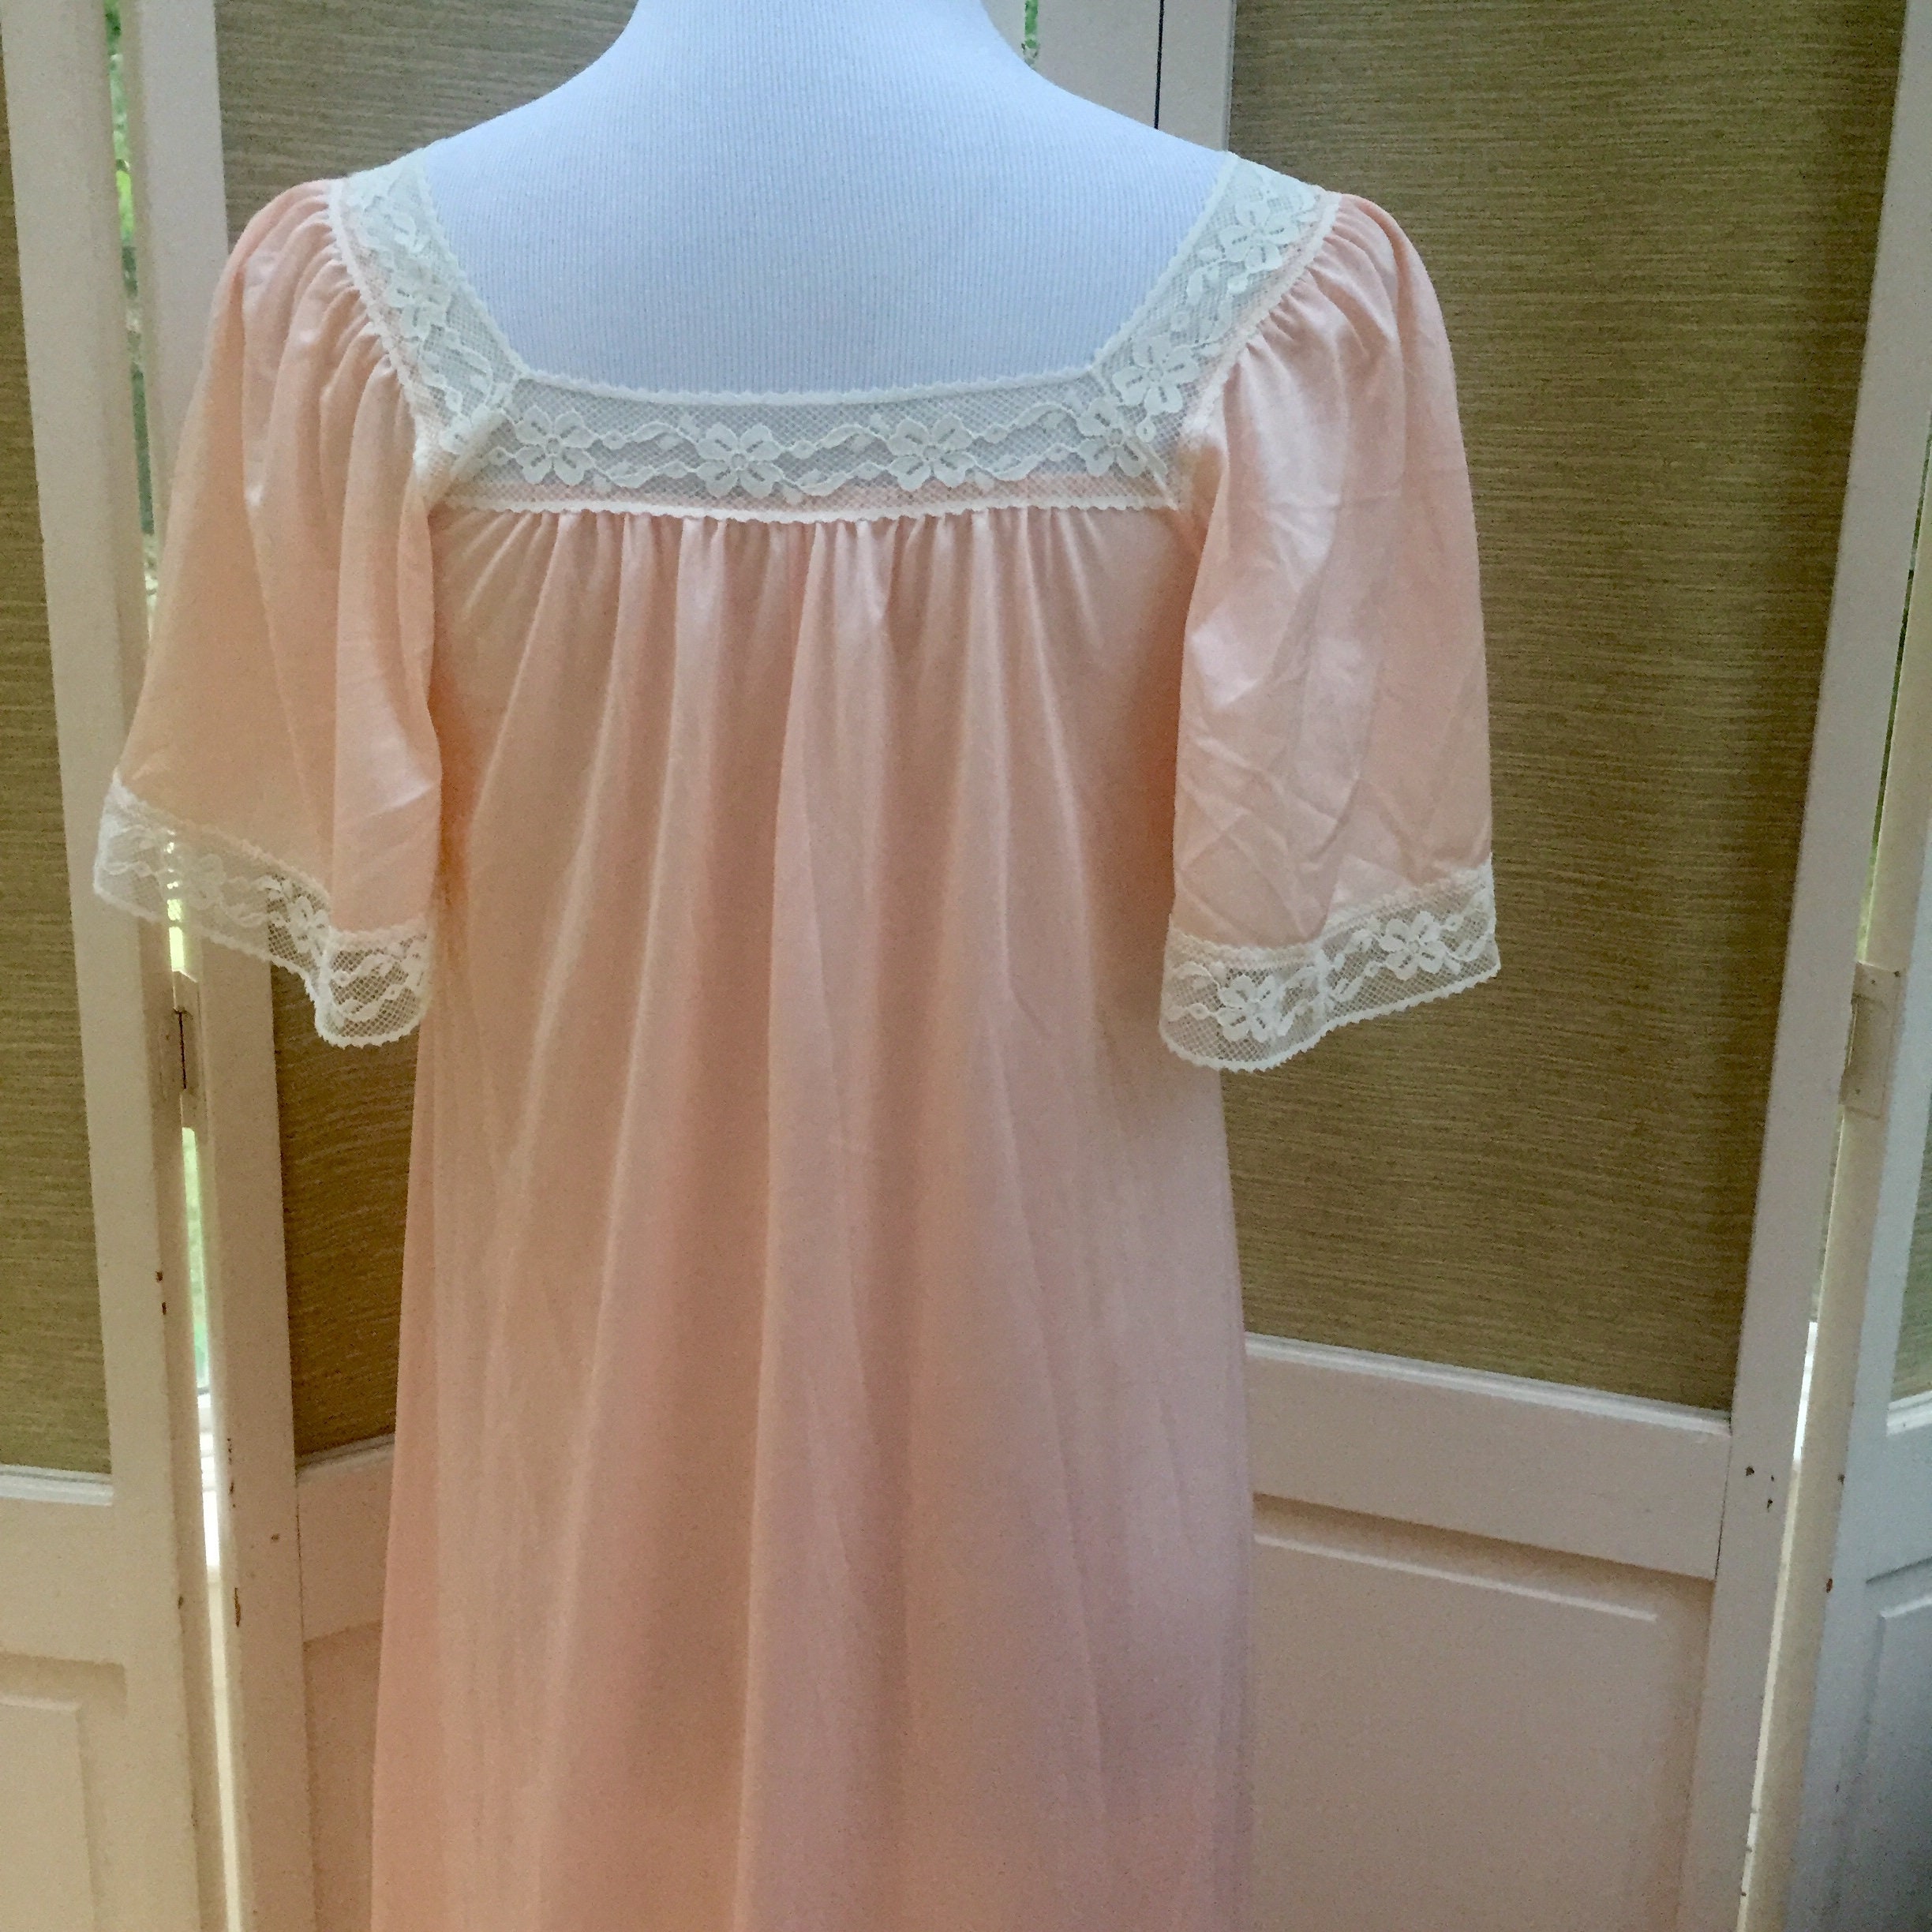 Vintage 1970s Nightgown, Vintage Apricot Nightgown, 1970s Angel Sleeve ...